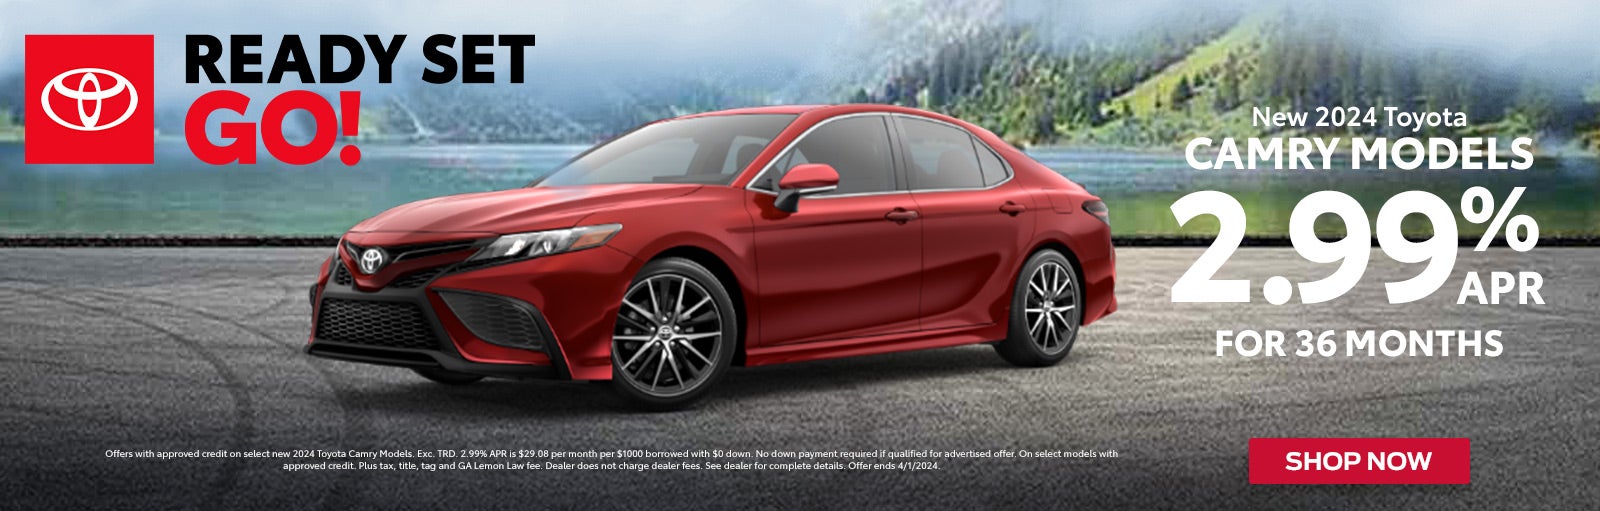 New 2024 Toyota Camry Models in Kennesaw, GA